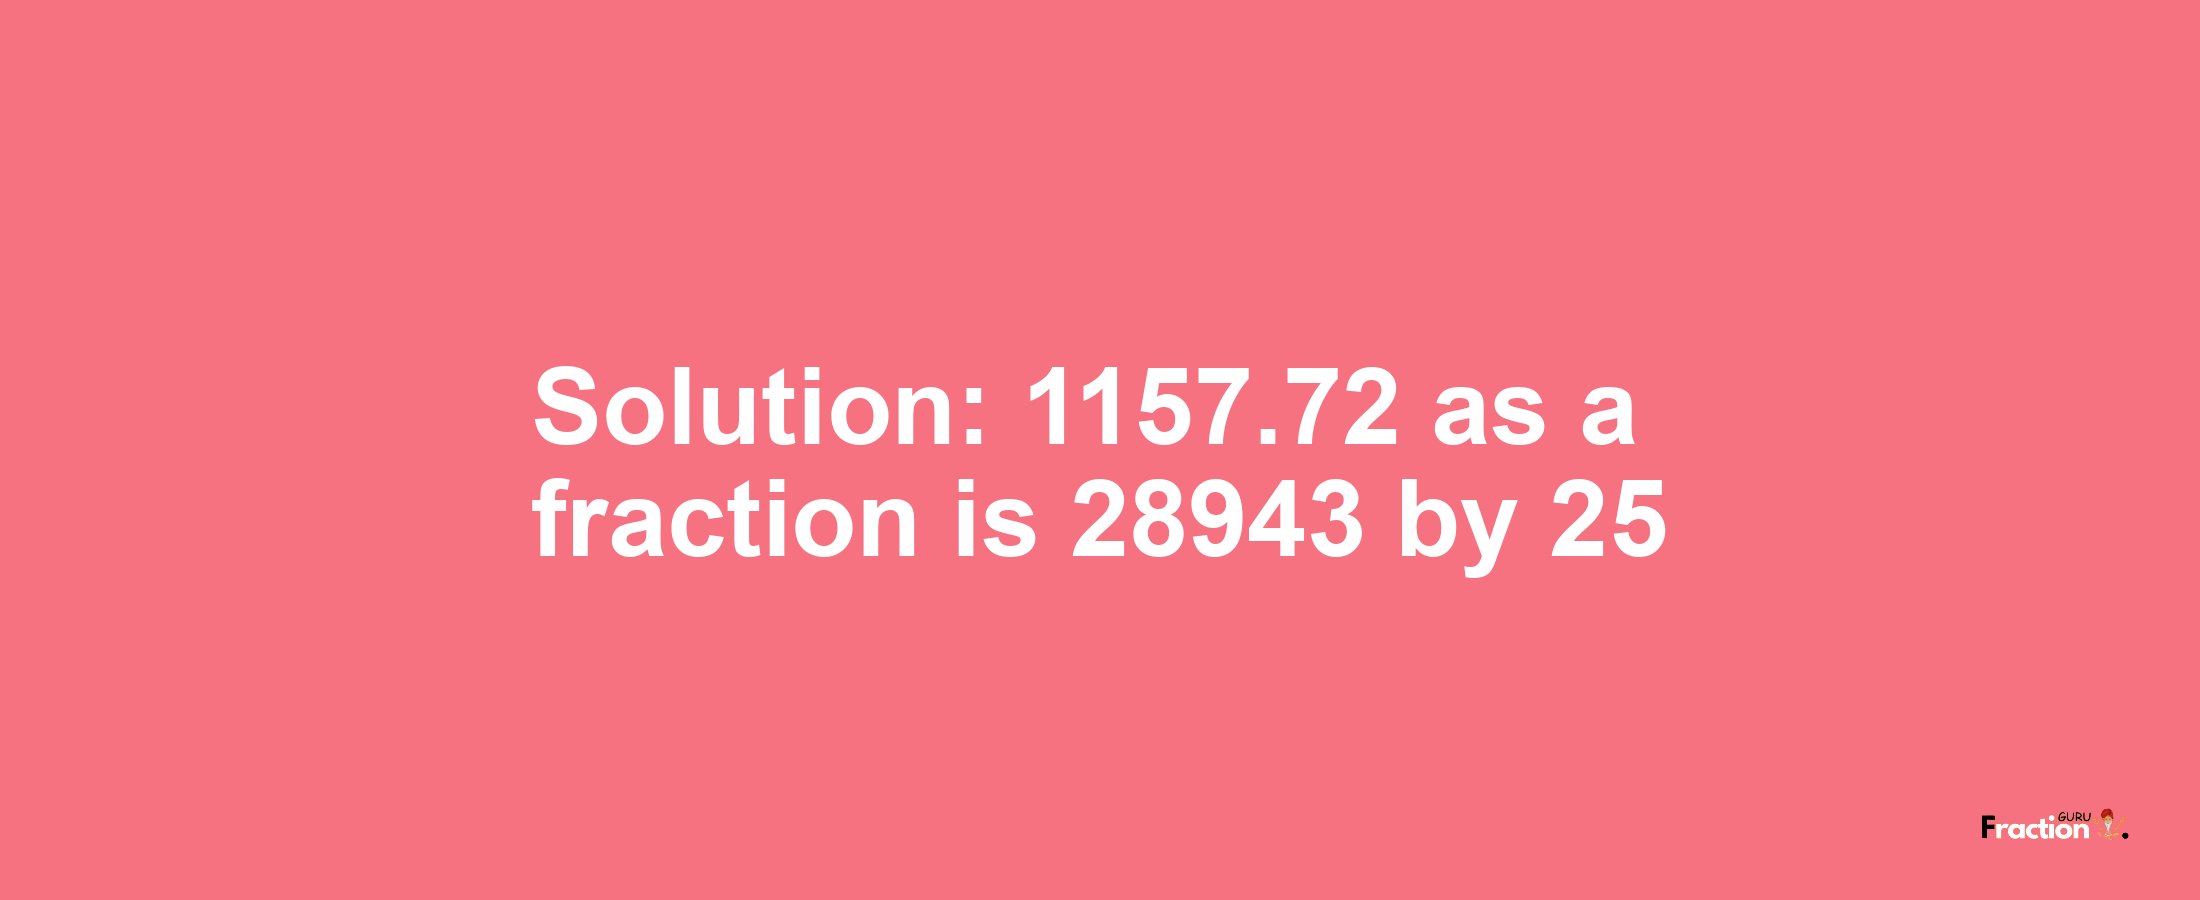 Solution:1157.72 as a fraction is 28943/25